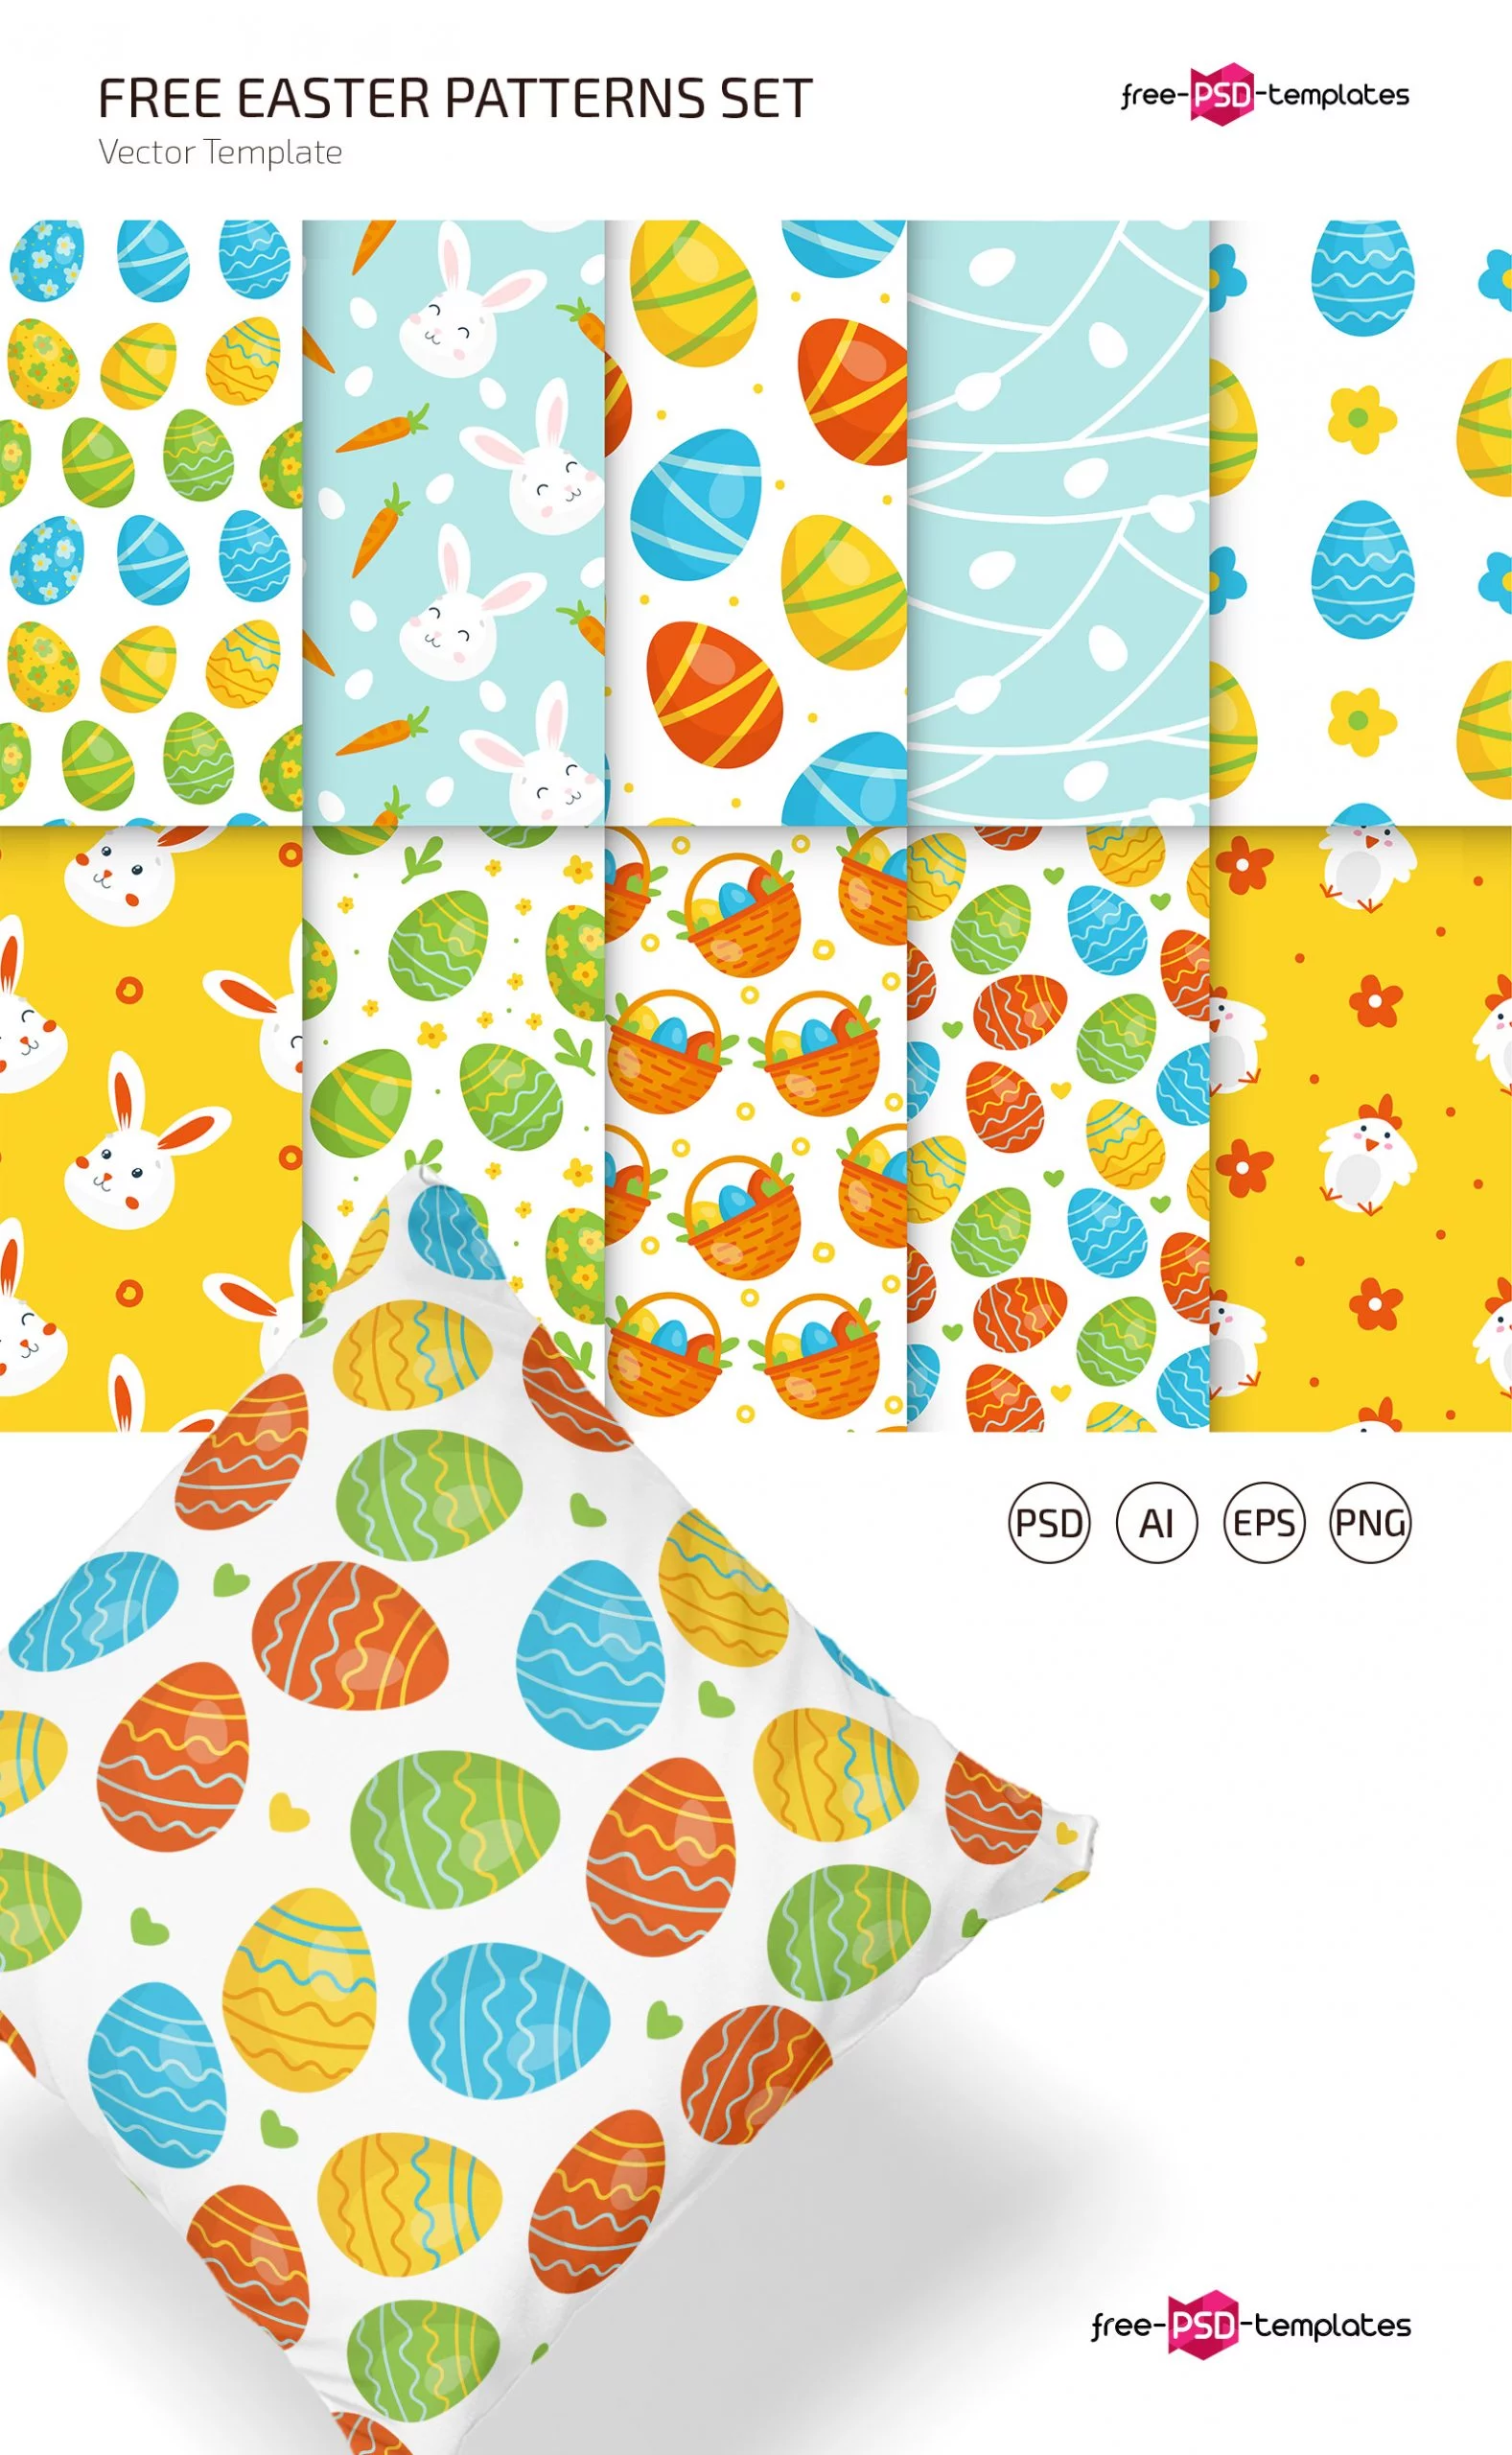 Free Easter Patterns